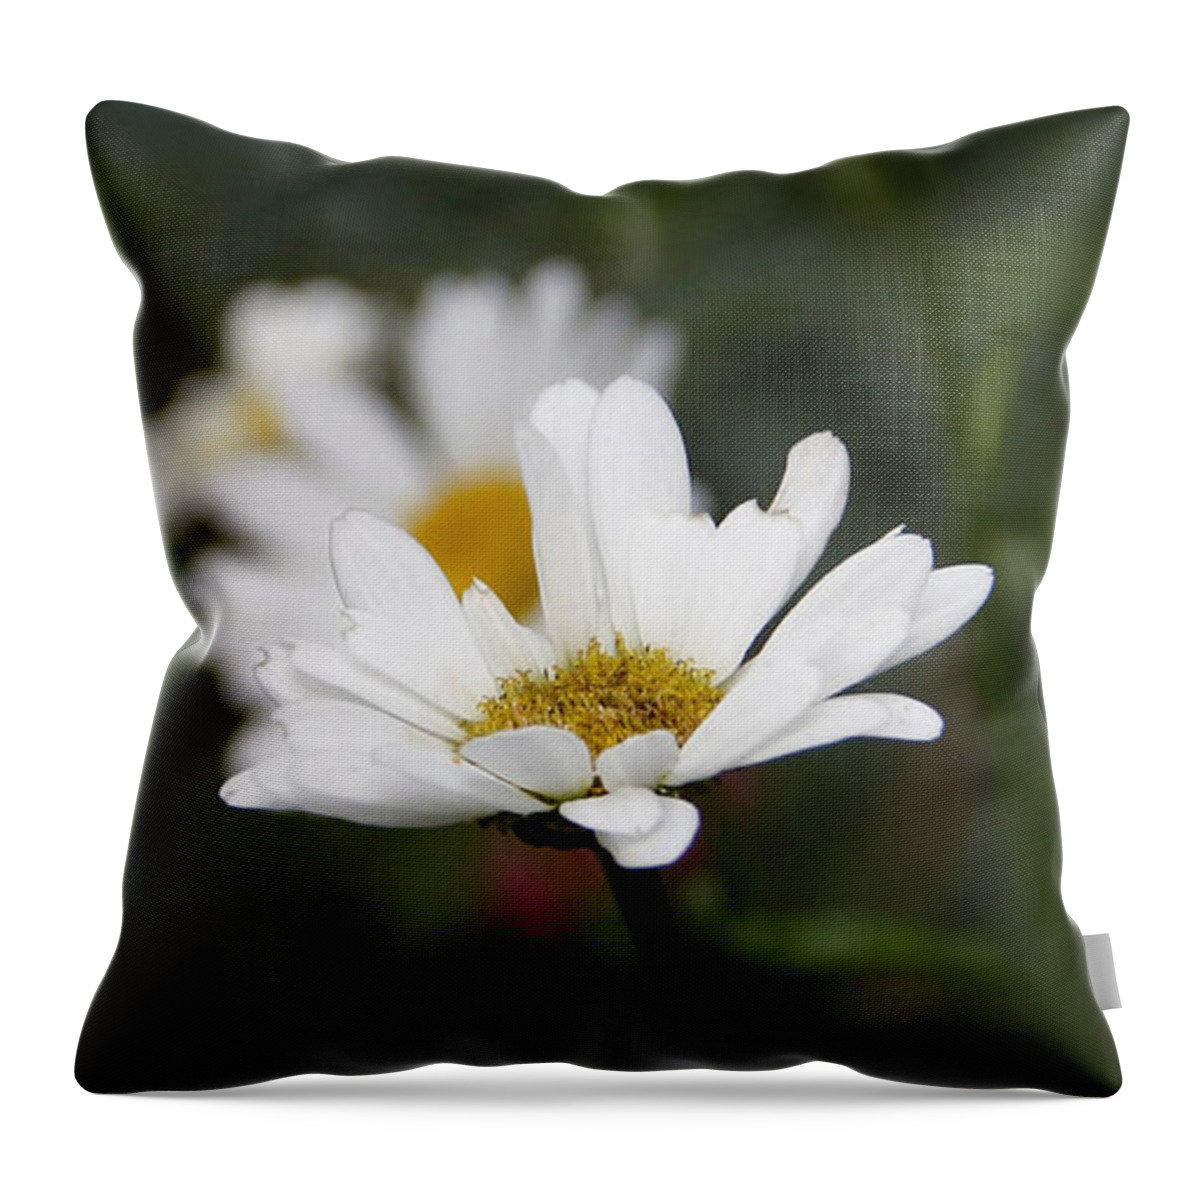 Daisies Throw Pillow featuring the photograph Smiling Daisies by Yvonne Wright